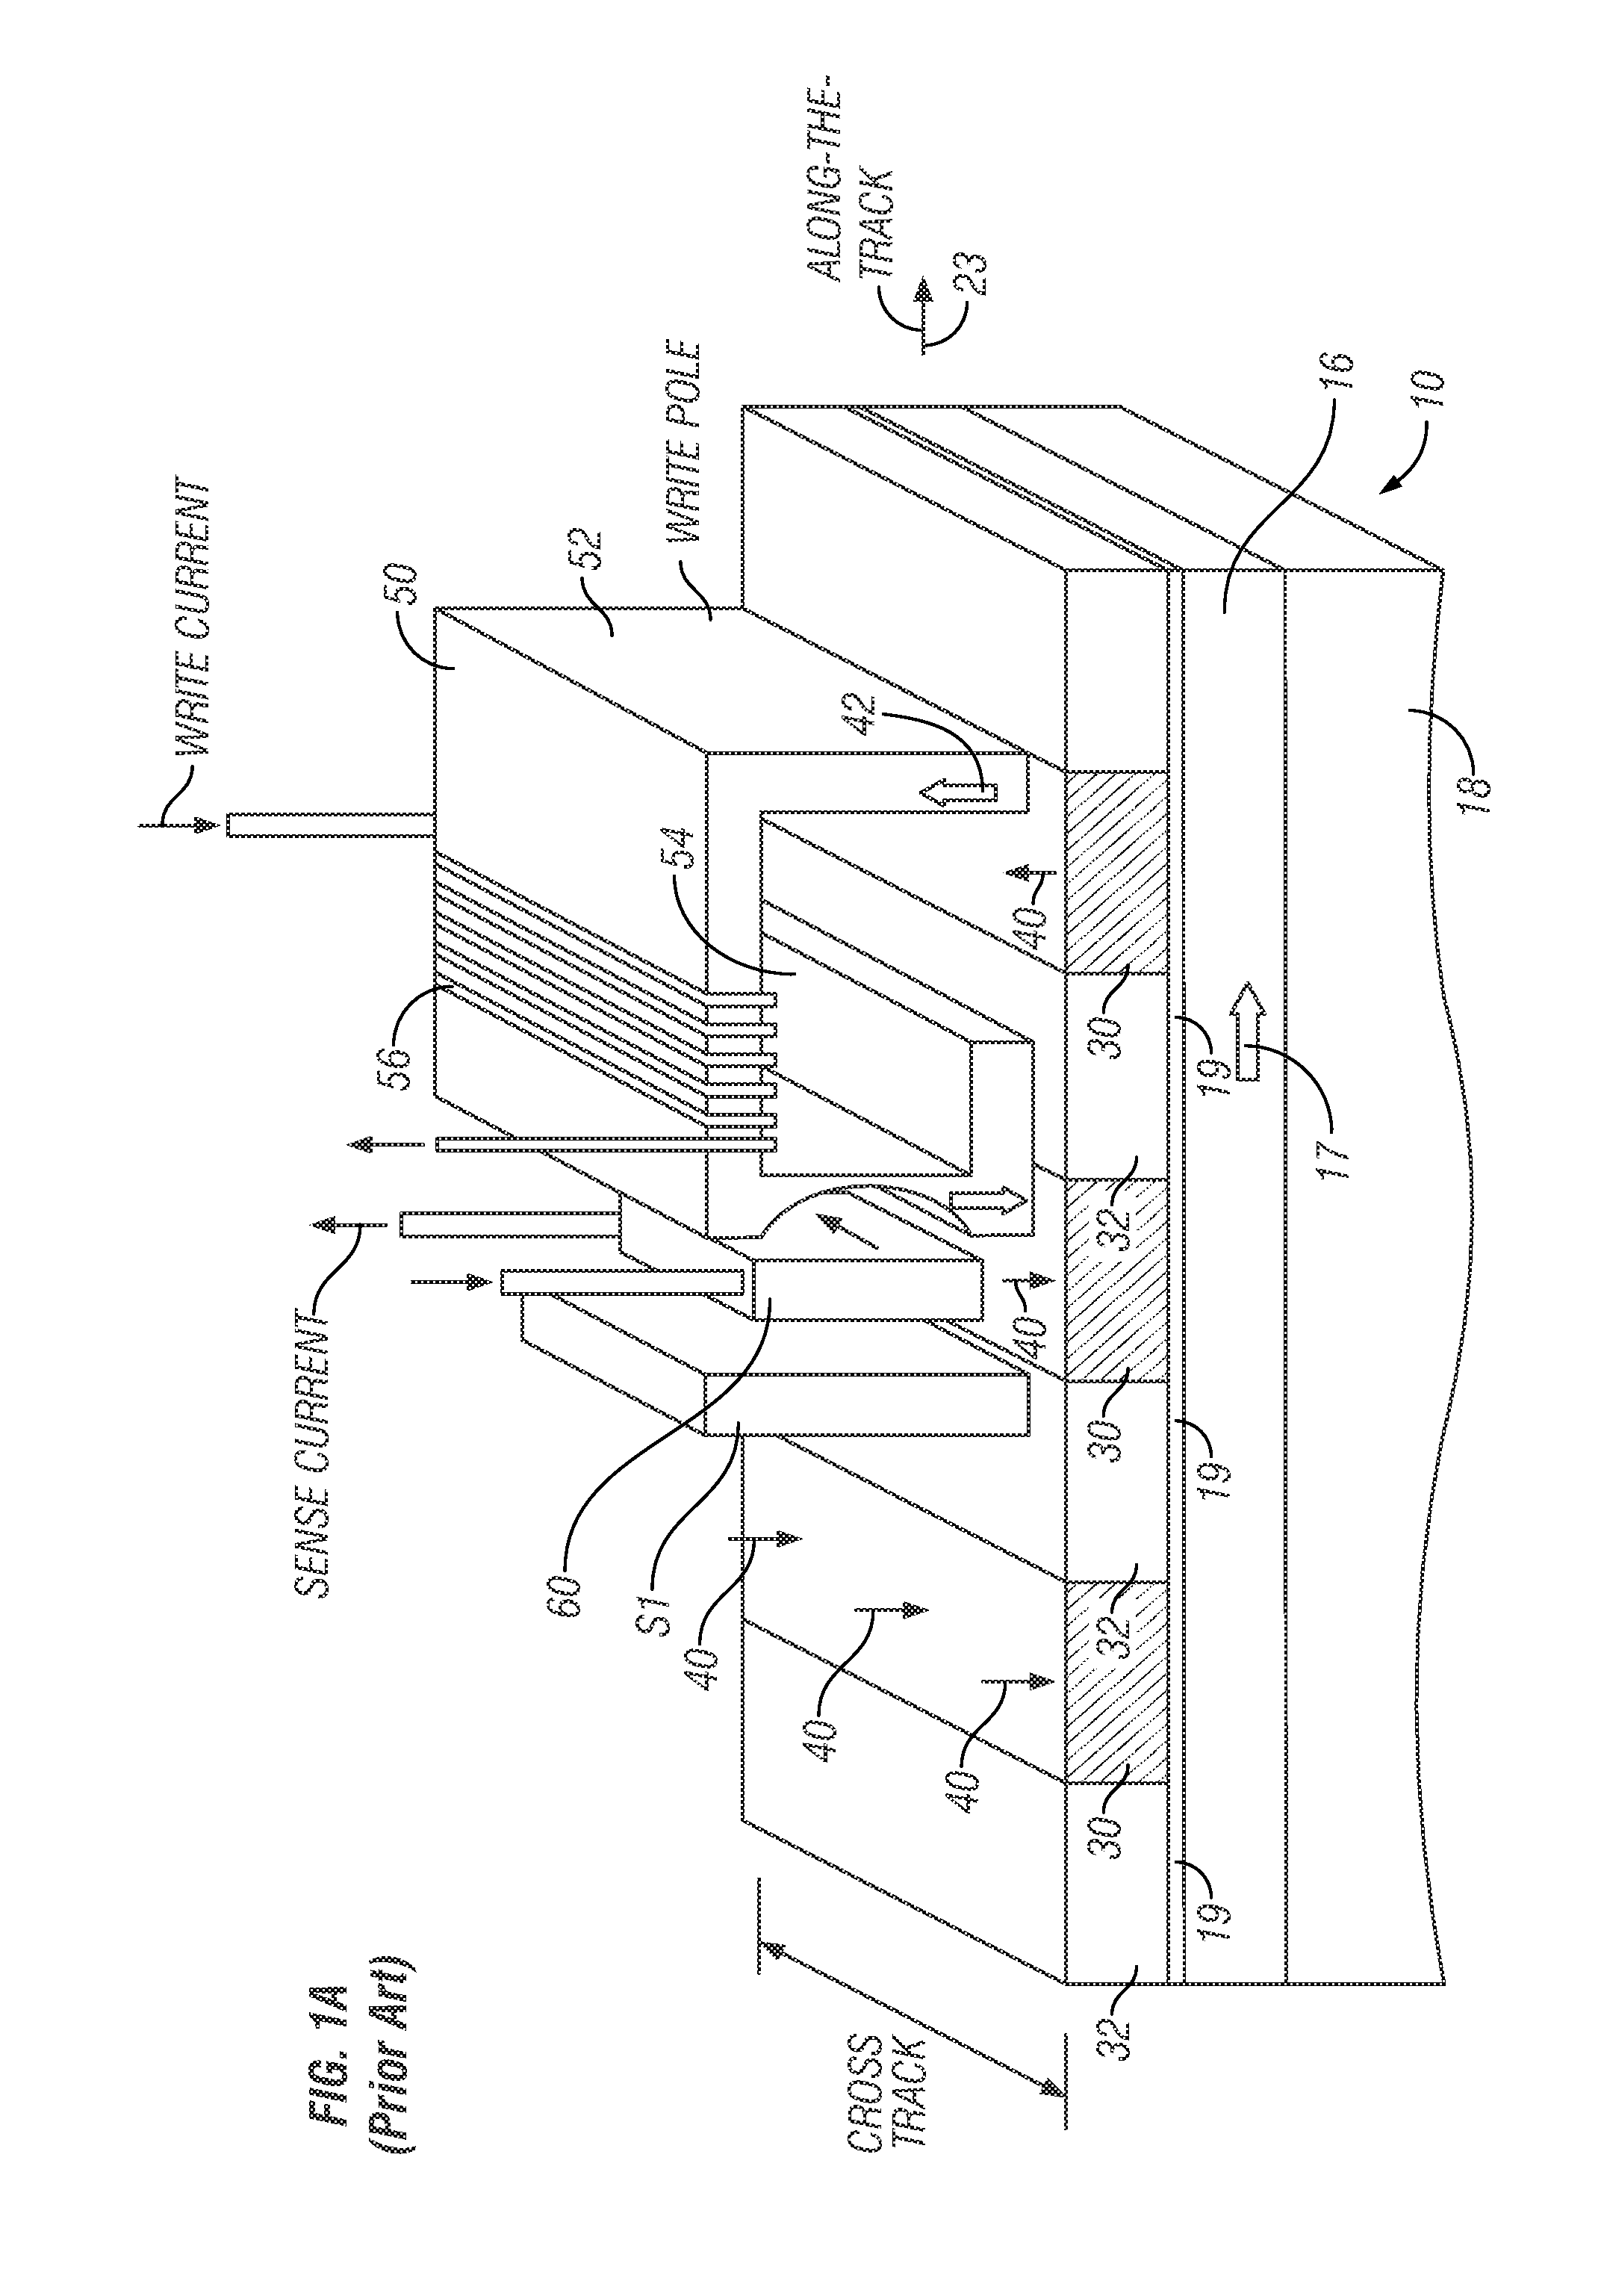 Patterned perpendicular magnetic recording disk drive and medium with patterned exchange bridge layer below the data islands